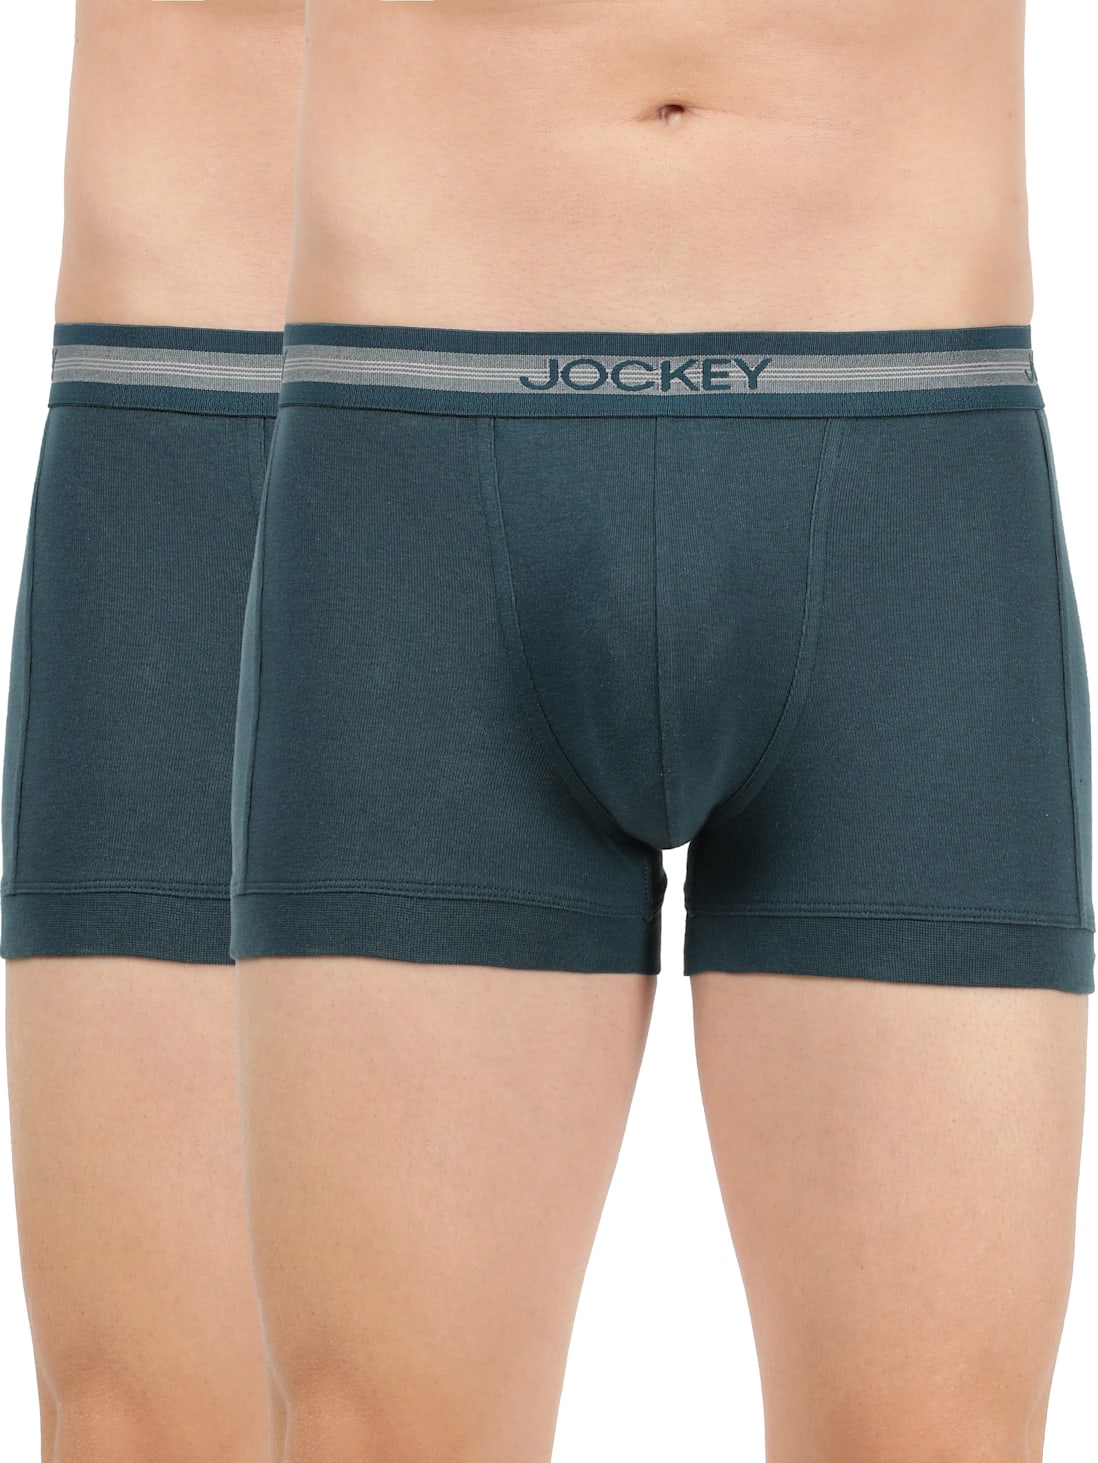 Jockey Assorted Men's Super Combed Cotton Rib Solid Trunk with Stay Fresh Properties - Elance Trunk 1015 Pack of 2 - ShopIMO